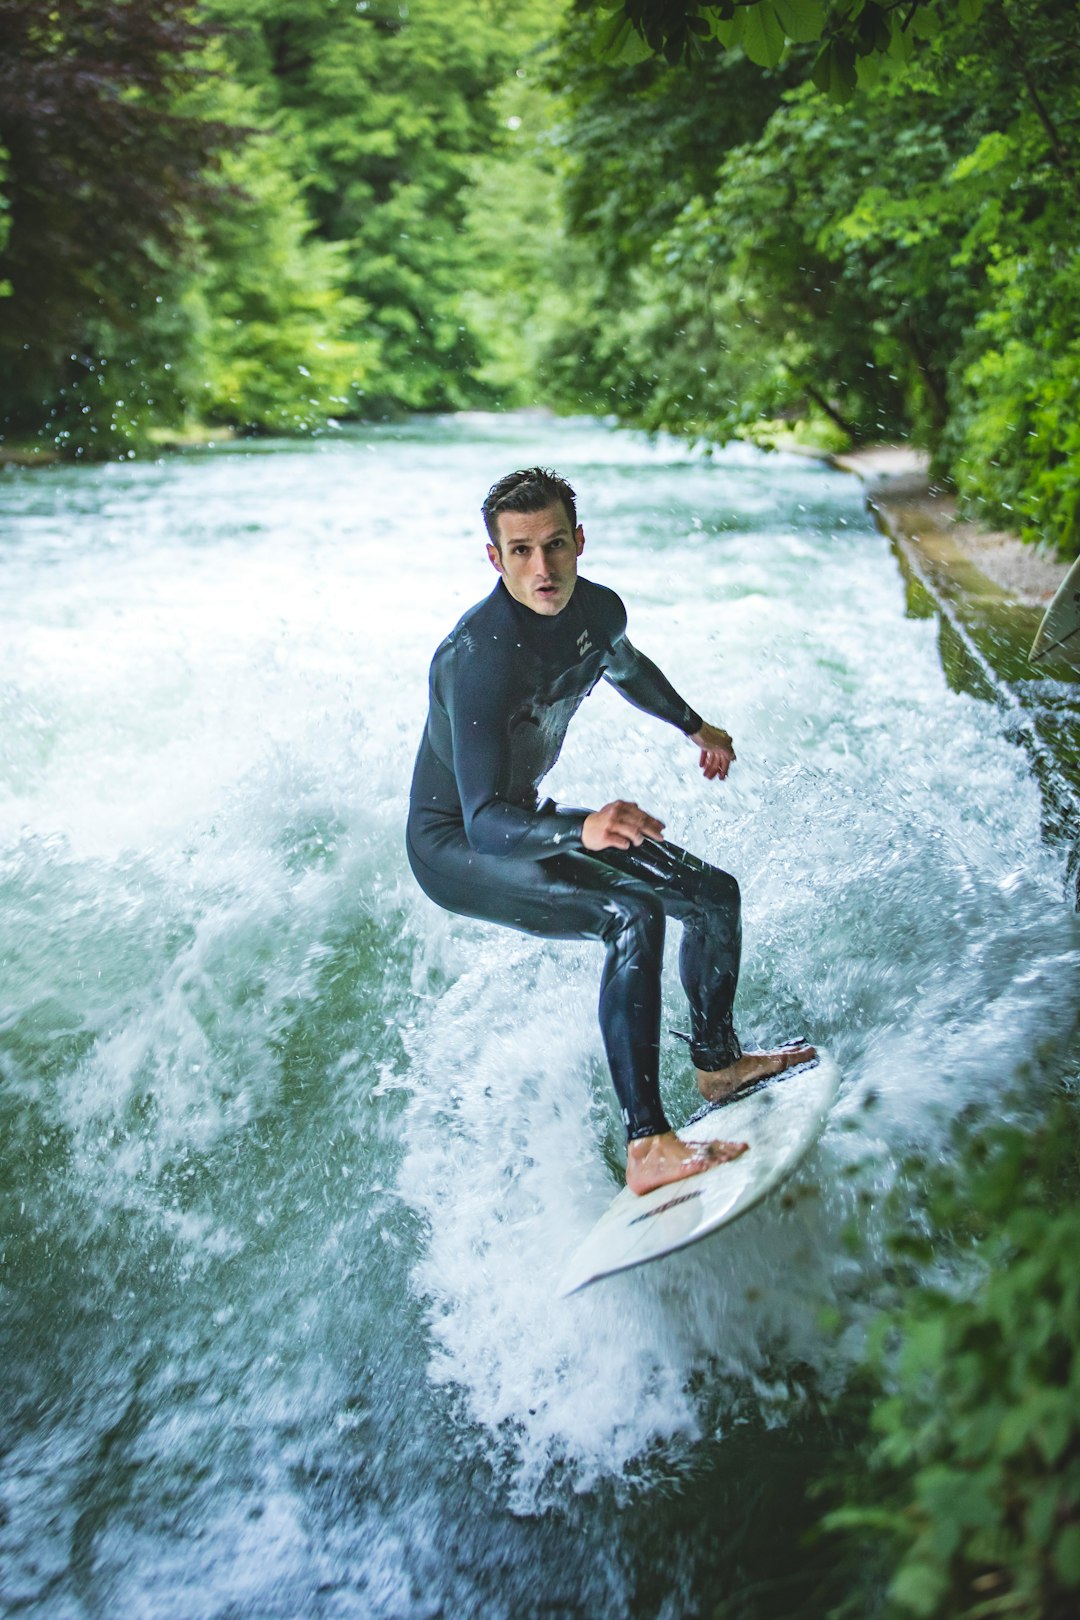 man in black jacket and blue denim jeans riding on brown surfboard on water during daytime